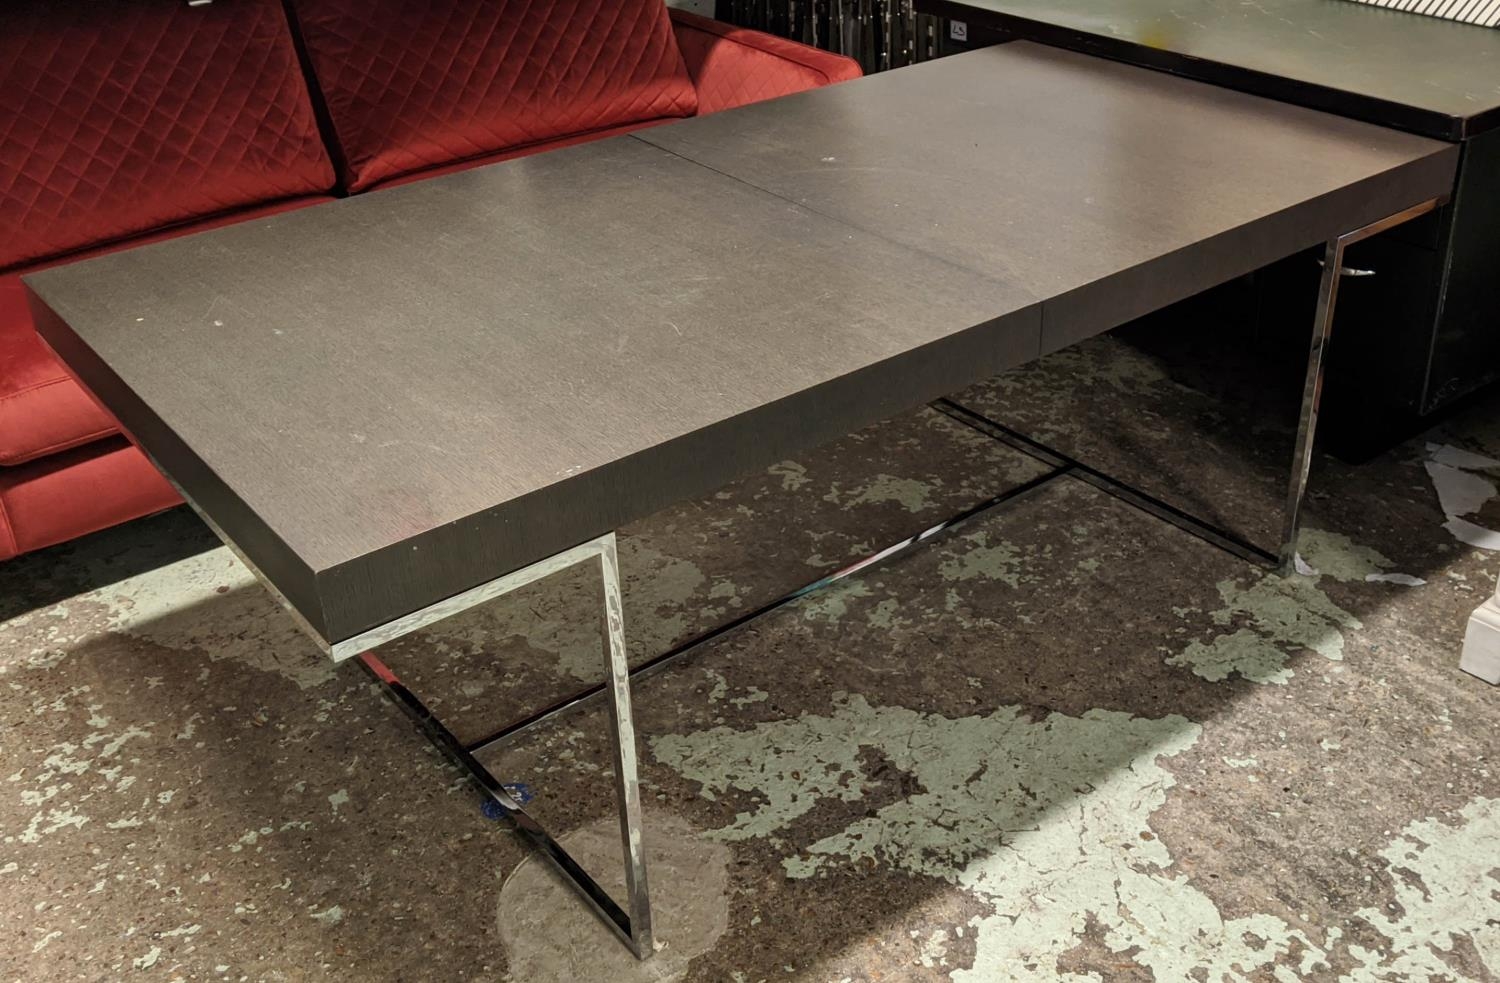 B&B ITALIA ATHOS TABLE BY PAOLO PIVA, 200cm x 100cm x 73cm unextended. - Image 2 of 7